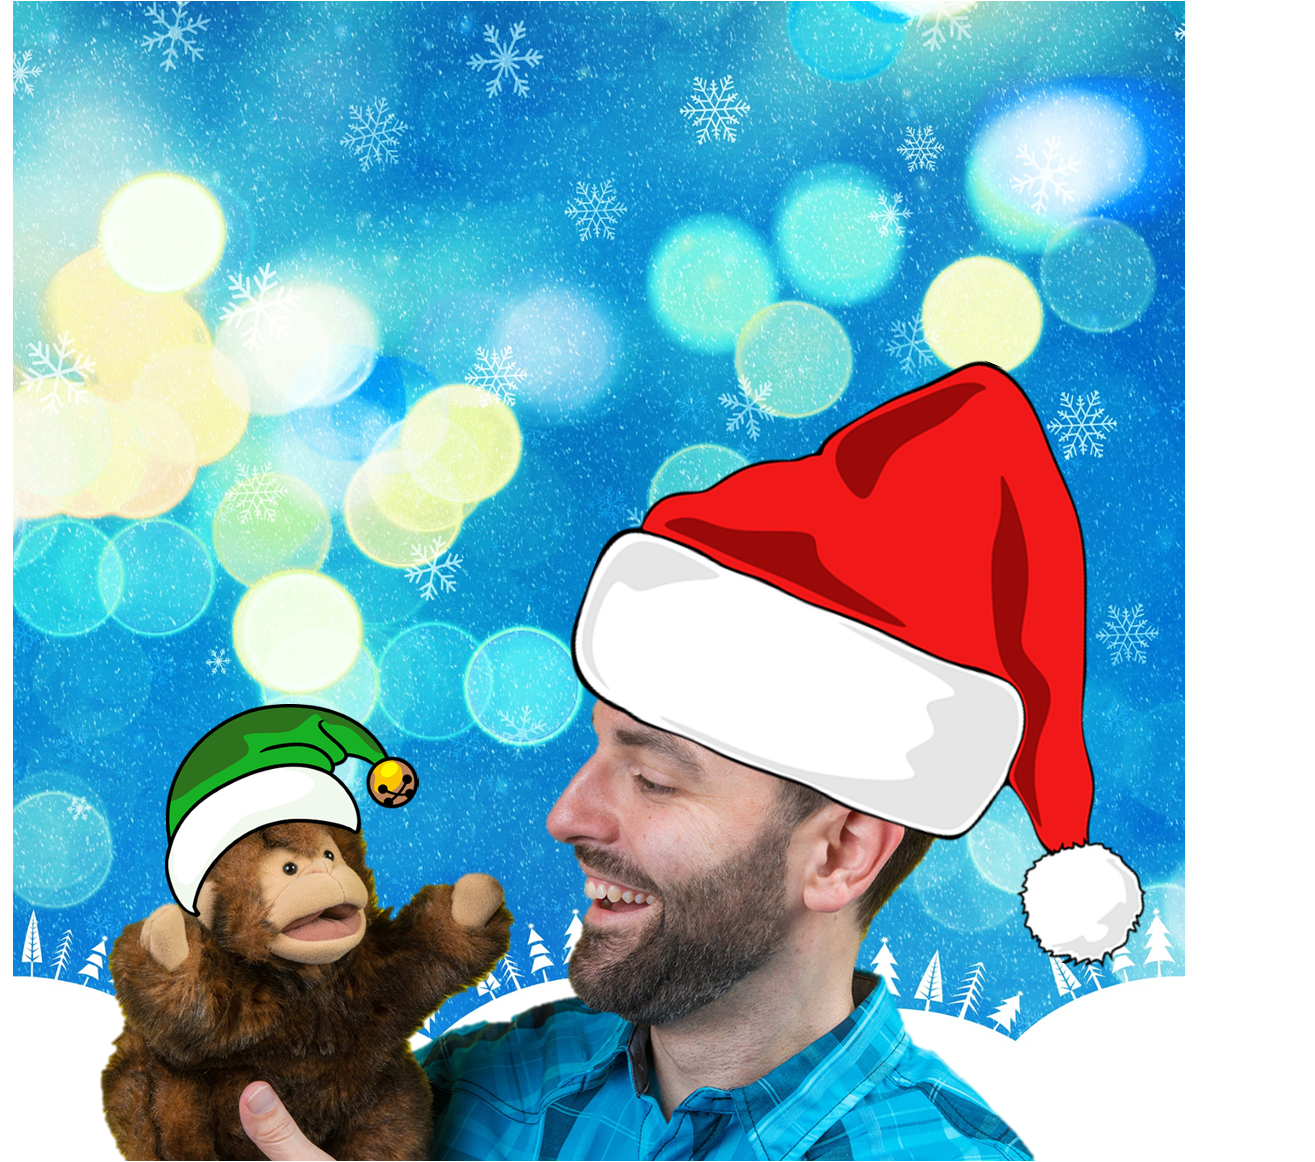 Image of Mr. Jon and his monkey puppet with added santa/elf hat and a sparkly, snowy background.